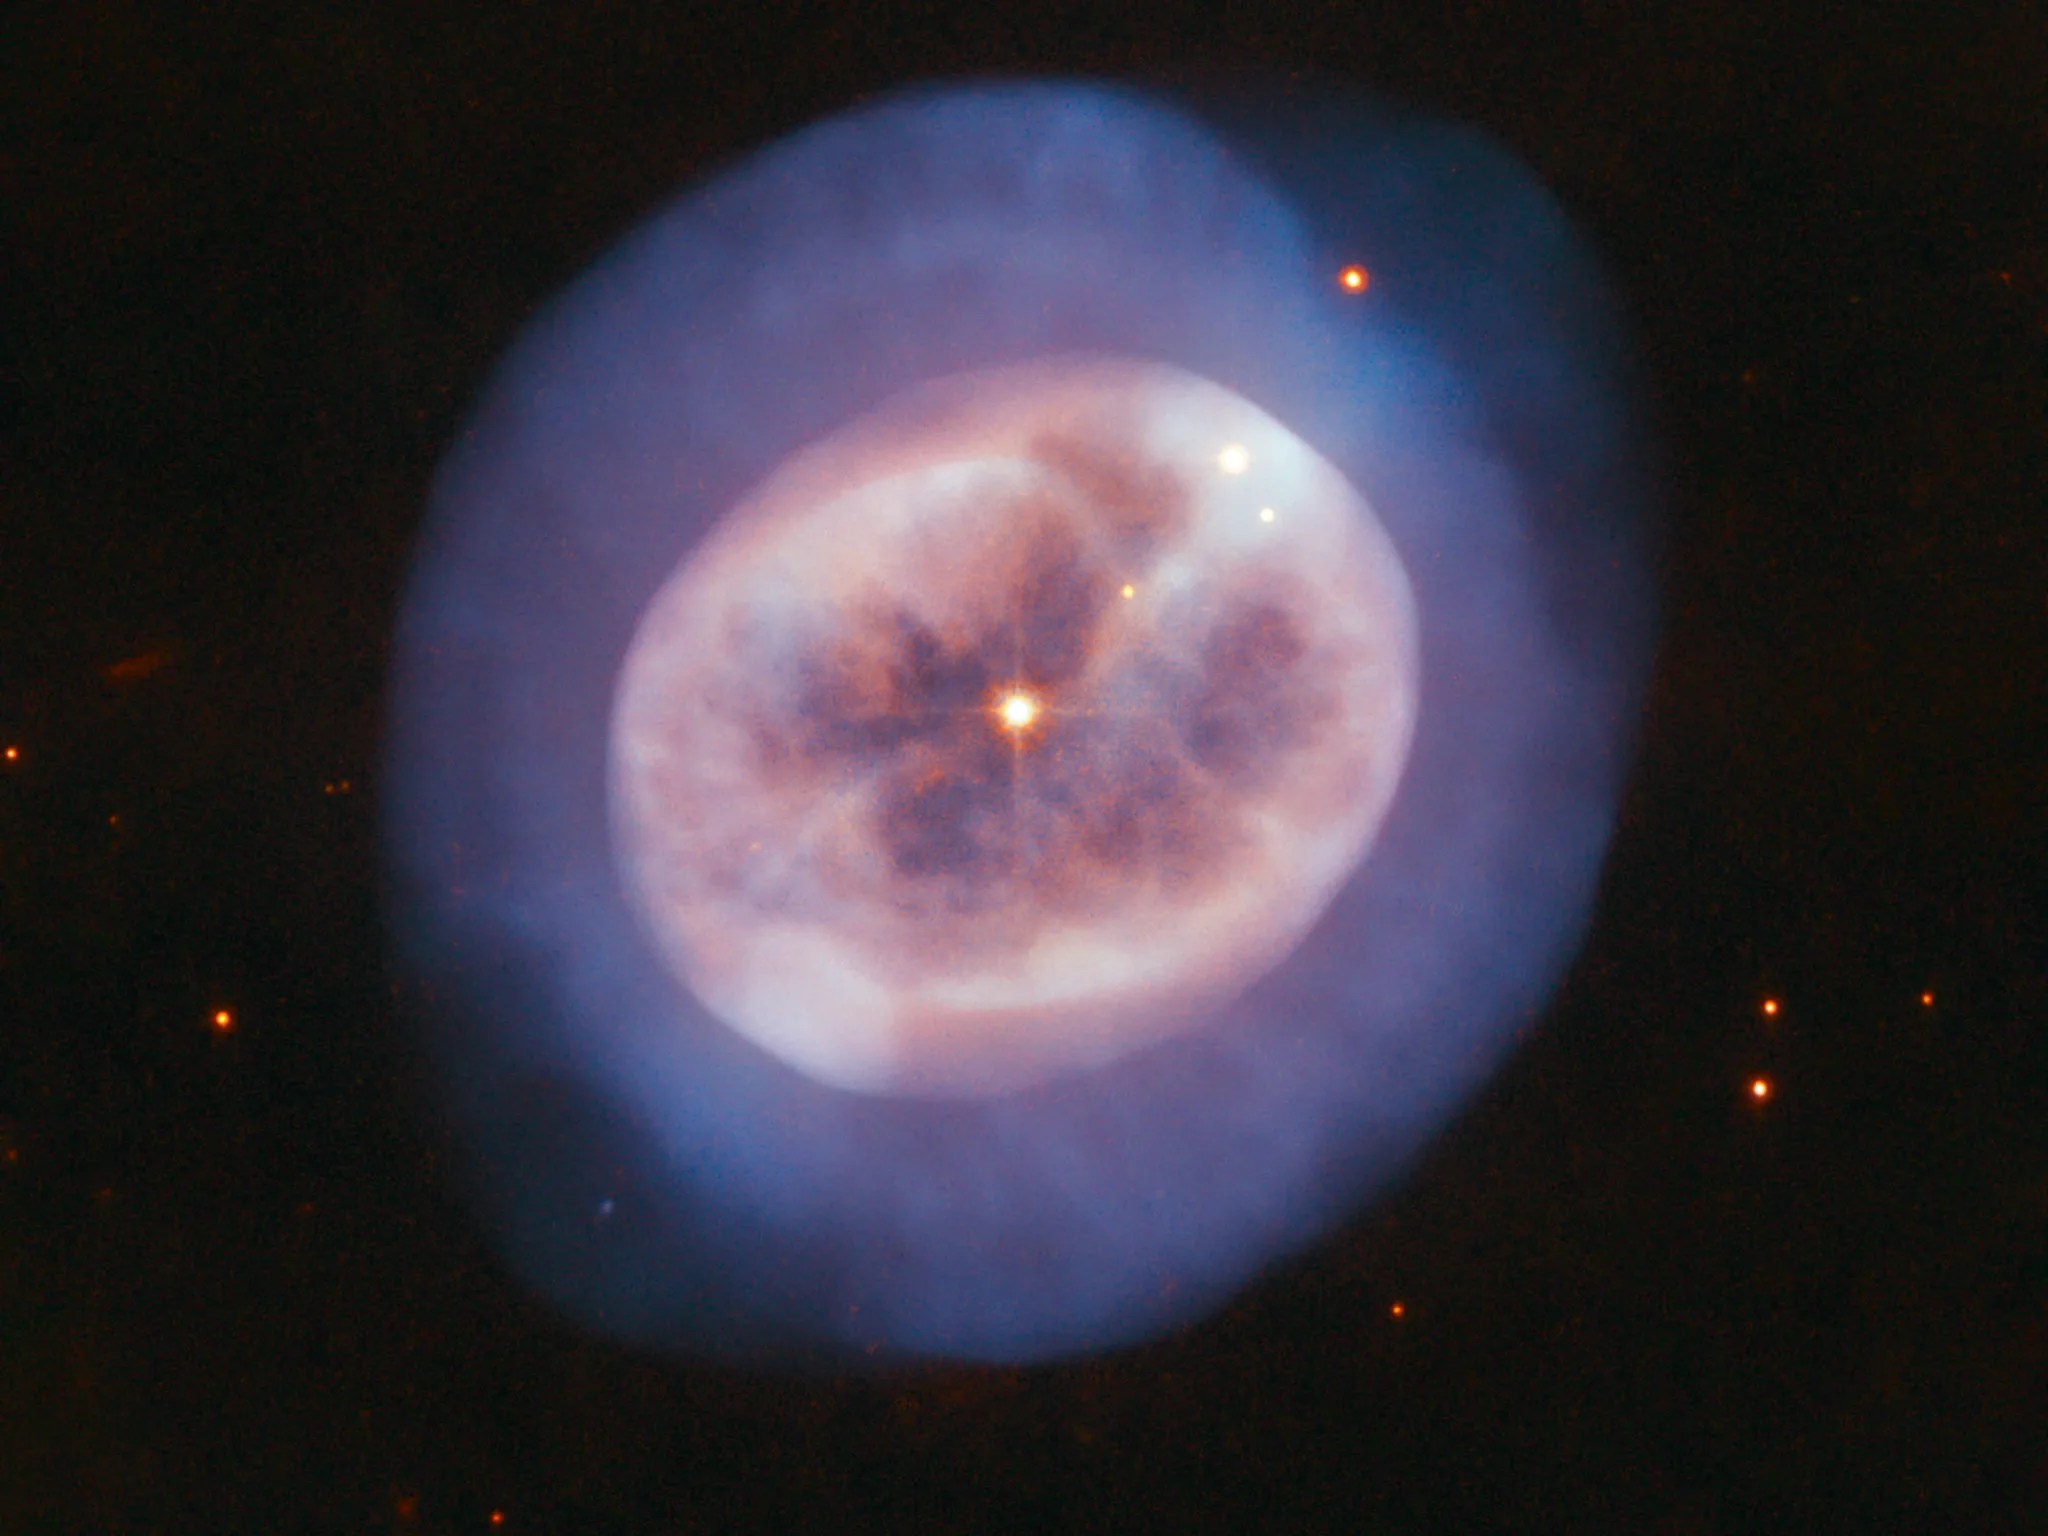 Ngc 2022 as seen by hubble